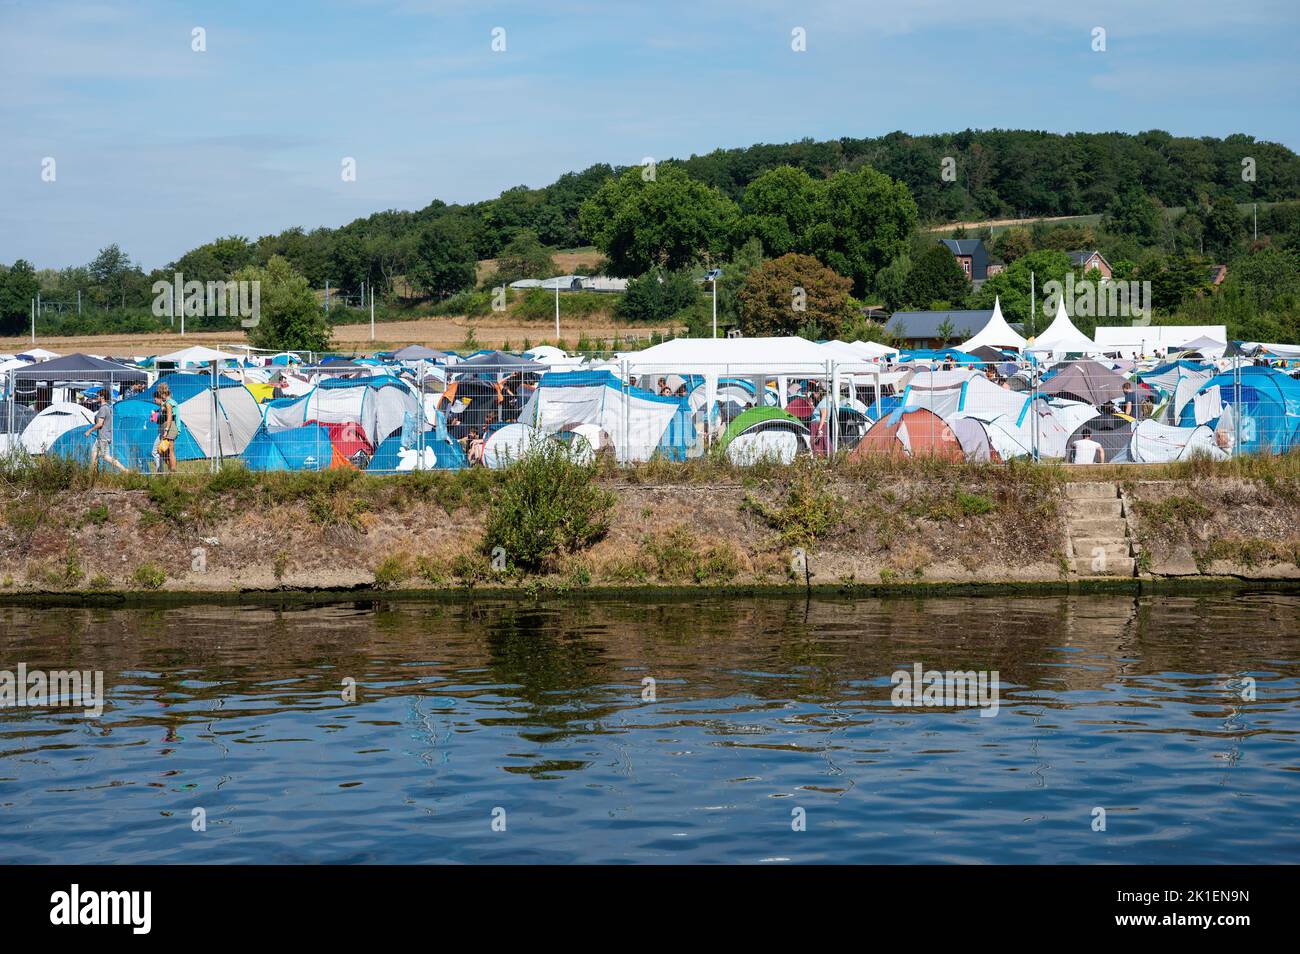 Floreffe, Wallonia, Belgium, 07 29 2022 - Tents at the local camping during summer Stock Photo